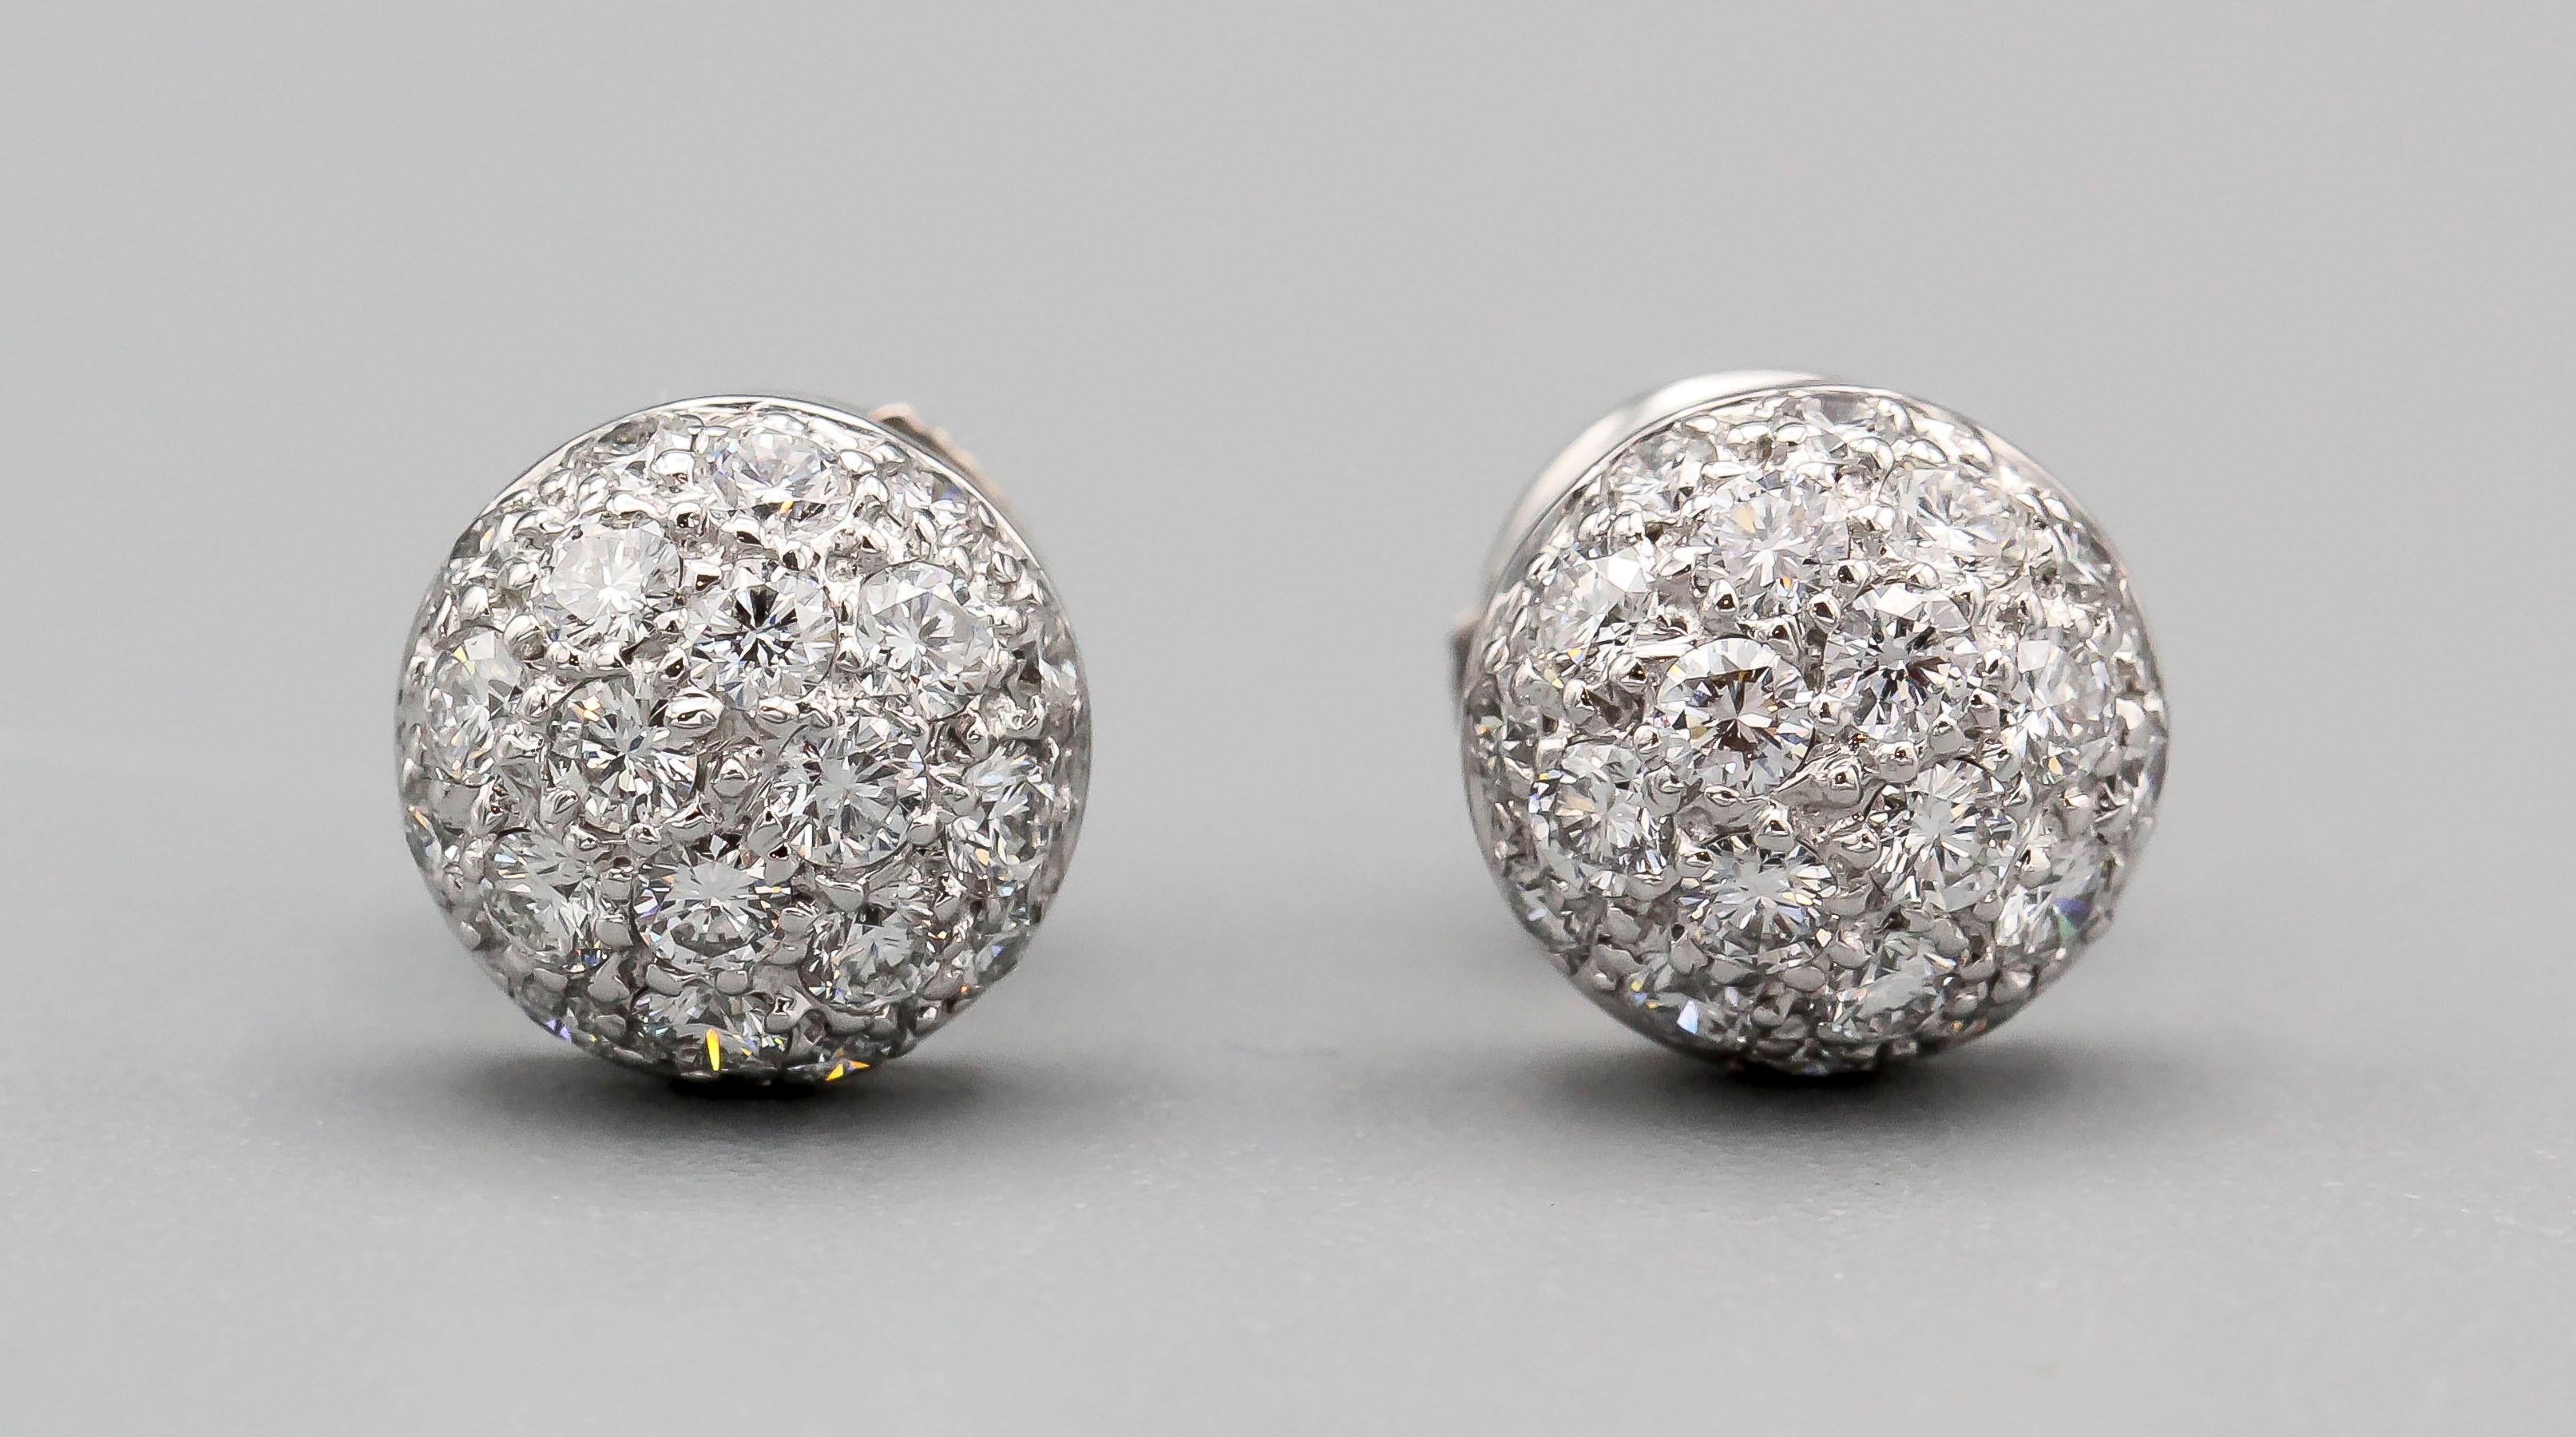 Fine pair of pave diamond and 18k white gold dome earrings by Cartier.  Designed as a stud earring, they are easy to wear day or night, business or casual attire.

Hallmarks: Cartier 750, reference numbers.